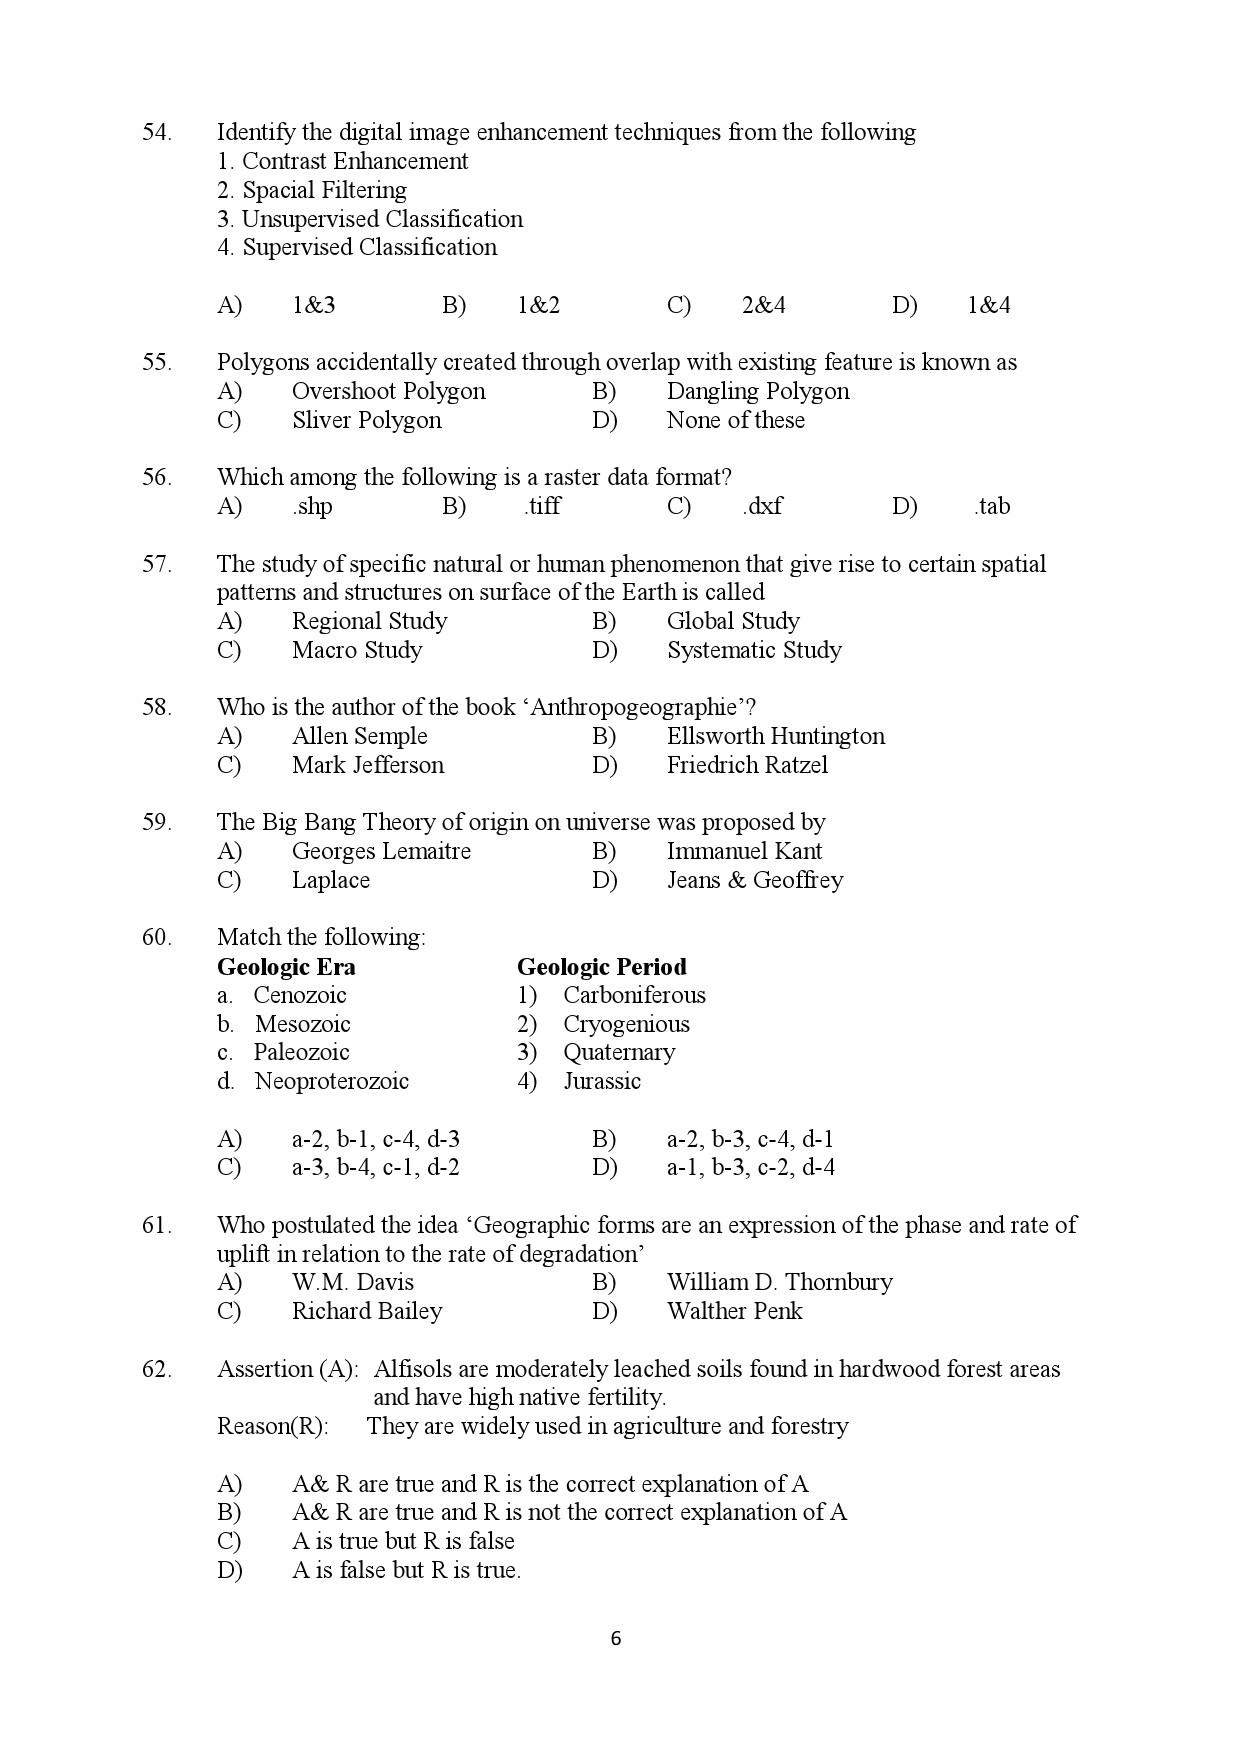 Kerala SET Geography Exam Question Paper July 2019 6